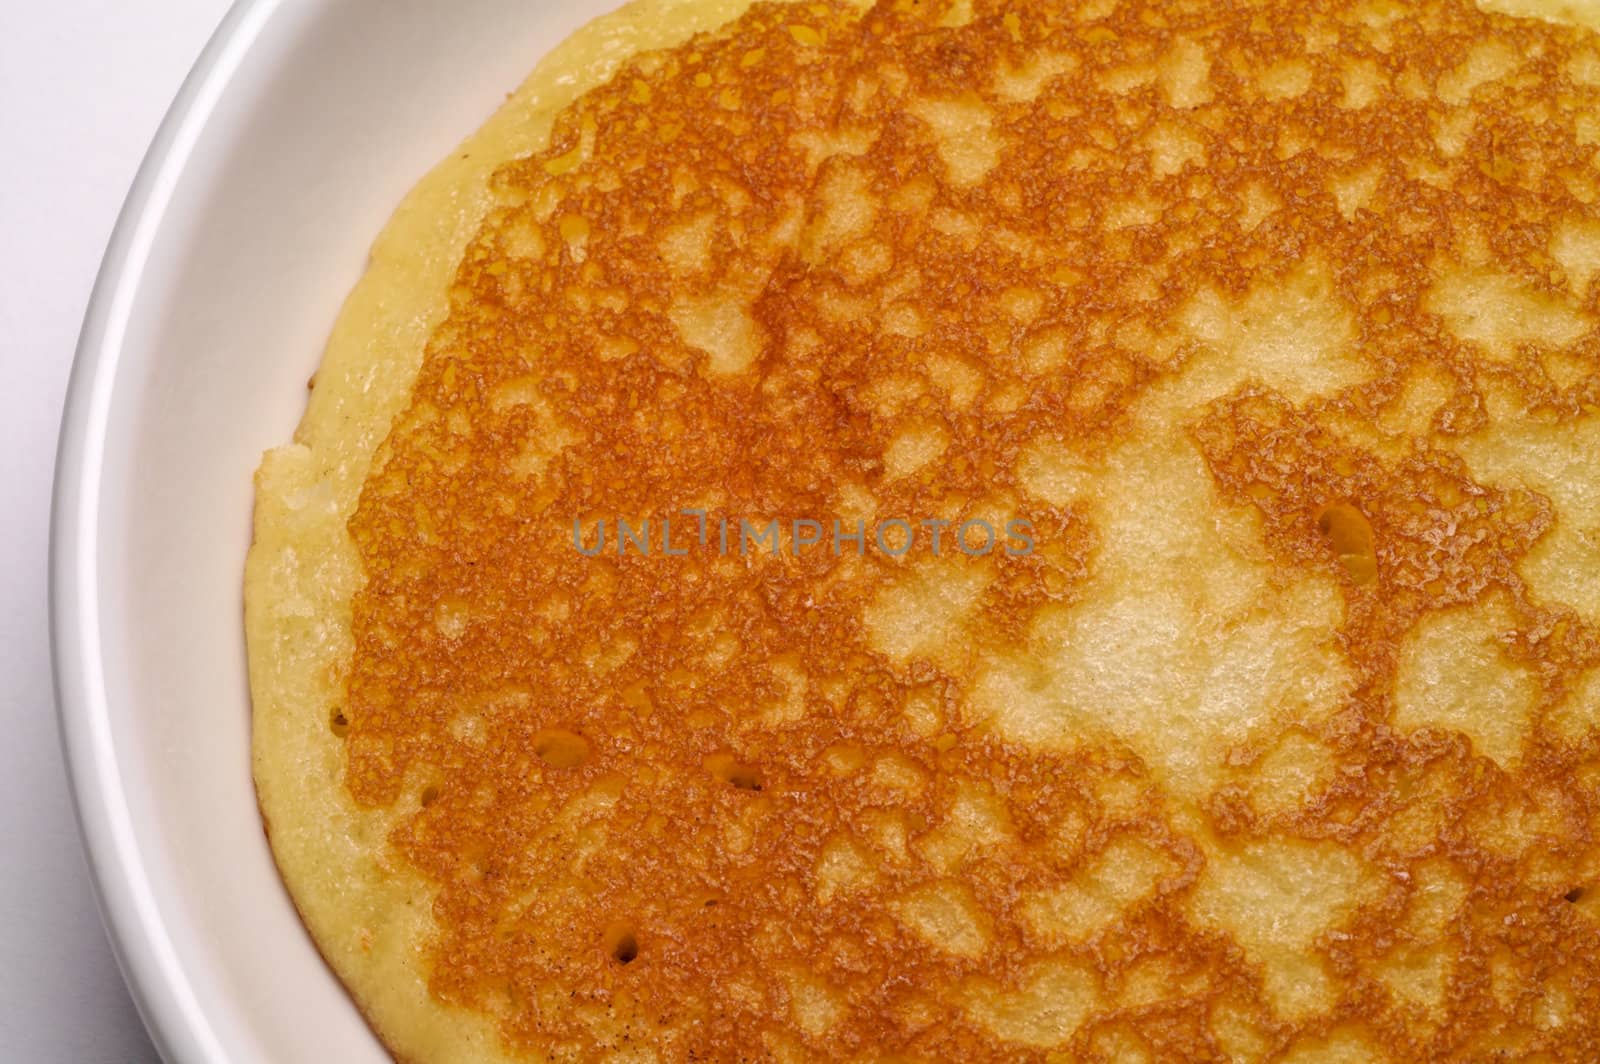 Pancake in a dish on white background